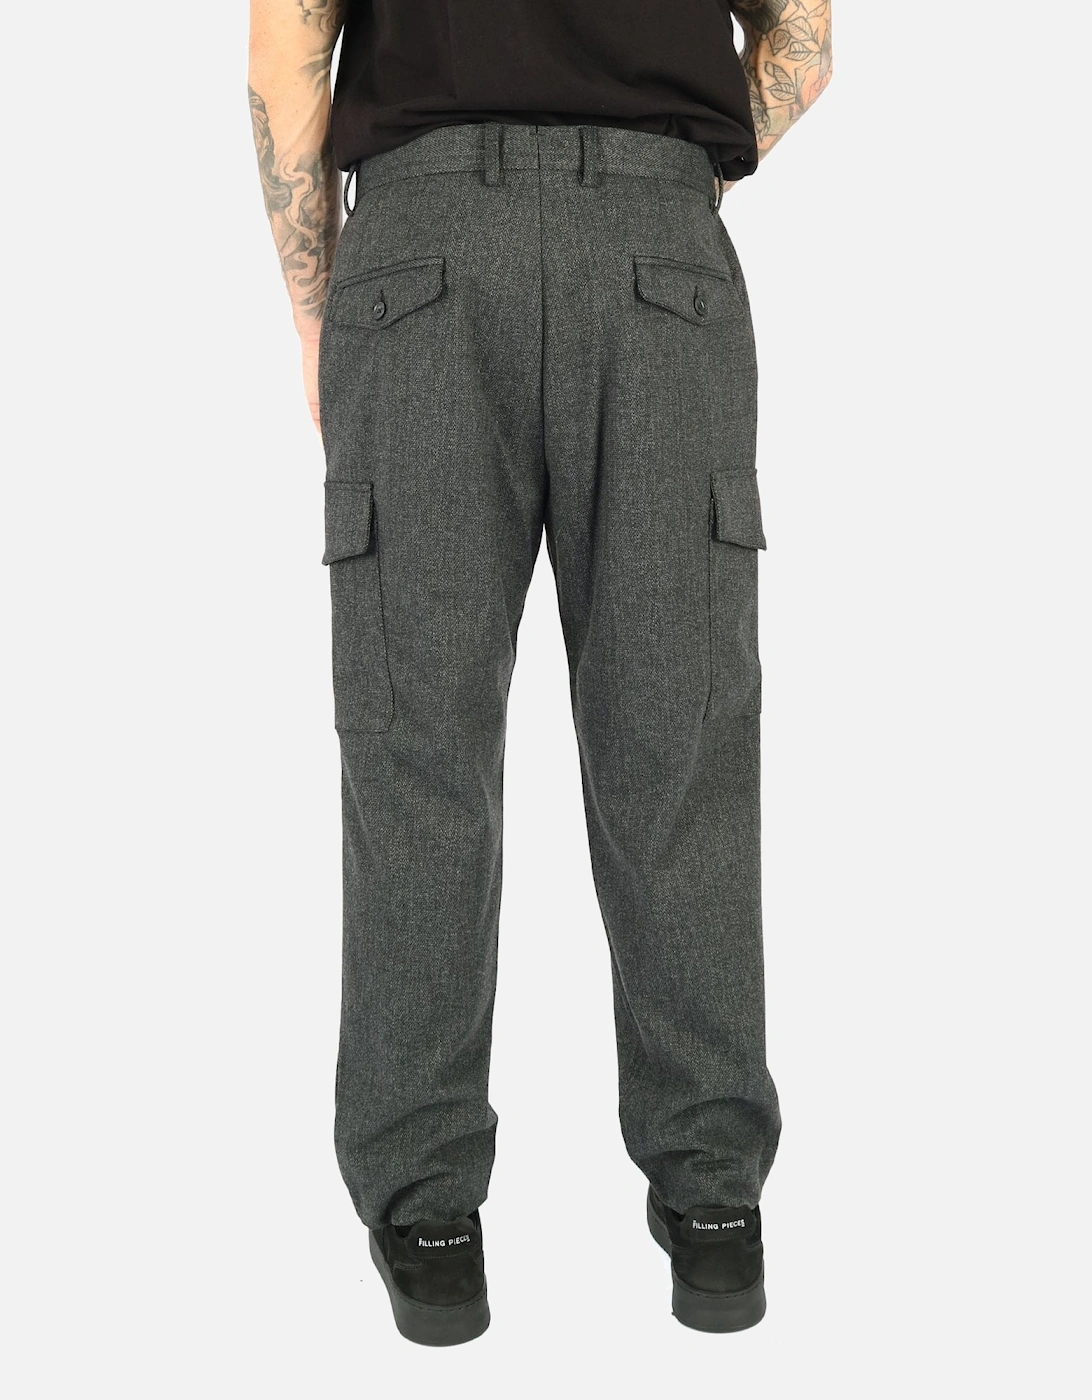 Textured Smart Stetch Grey Cargo Pant